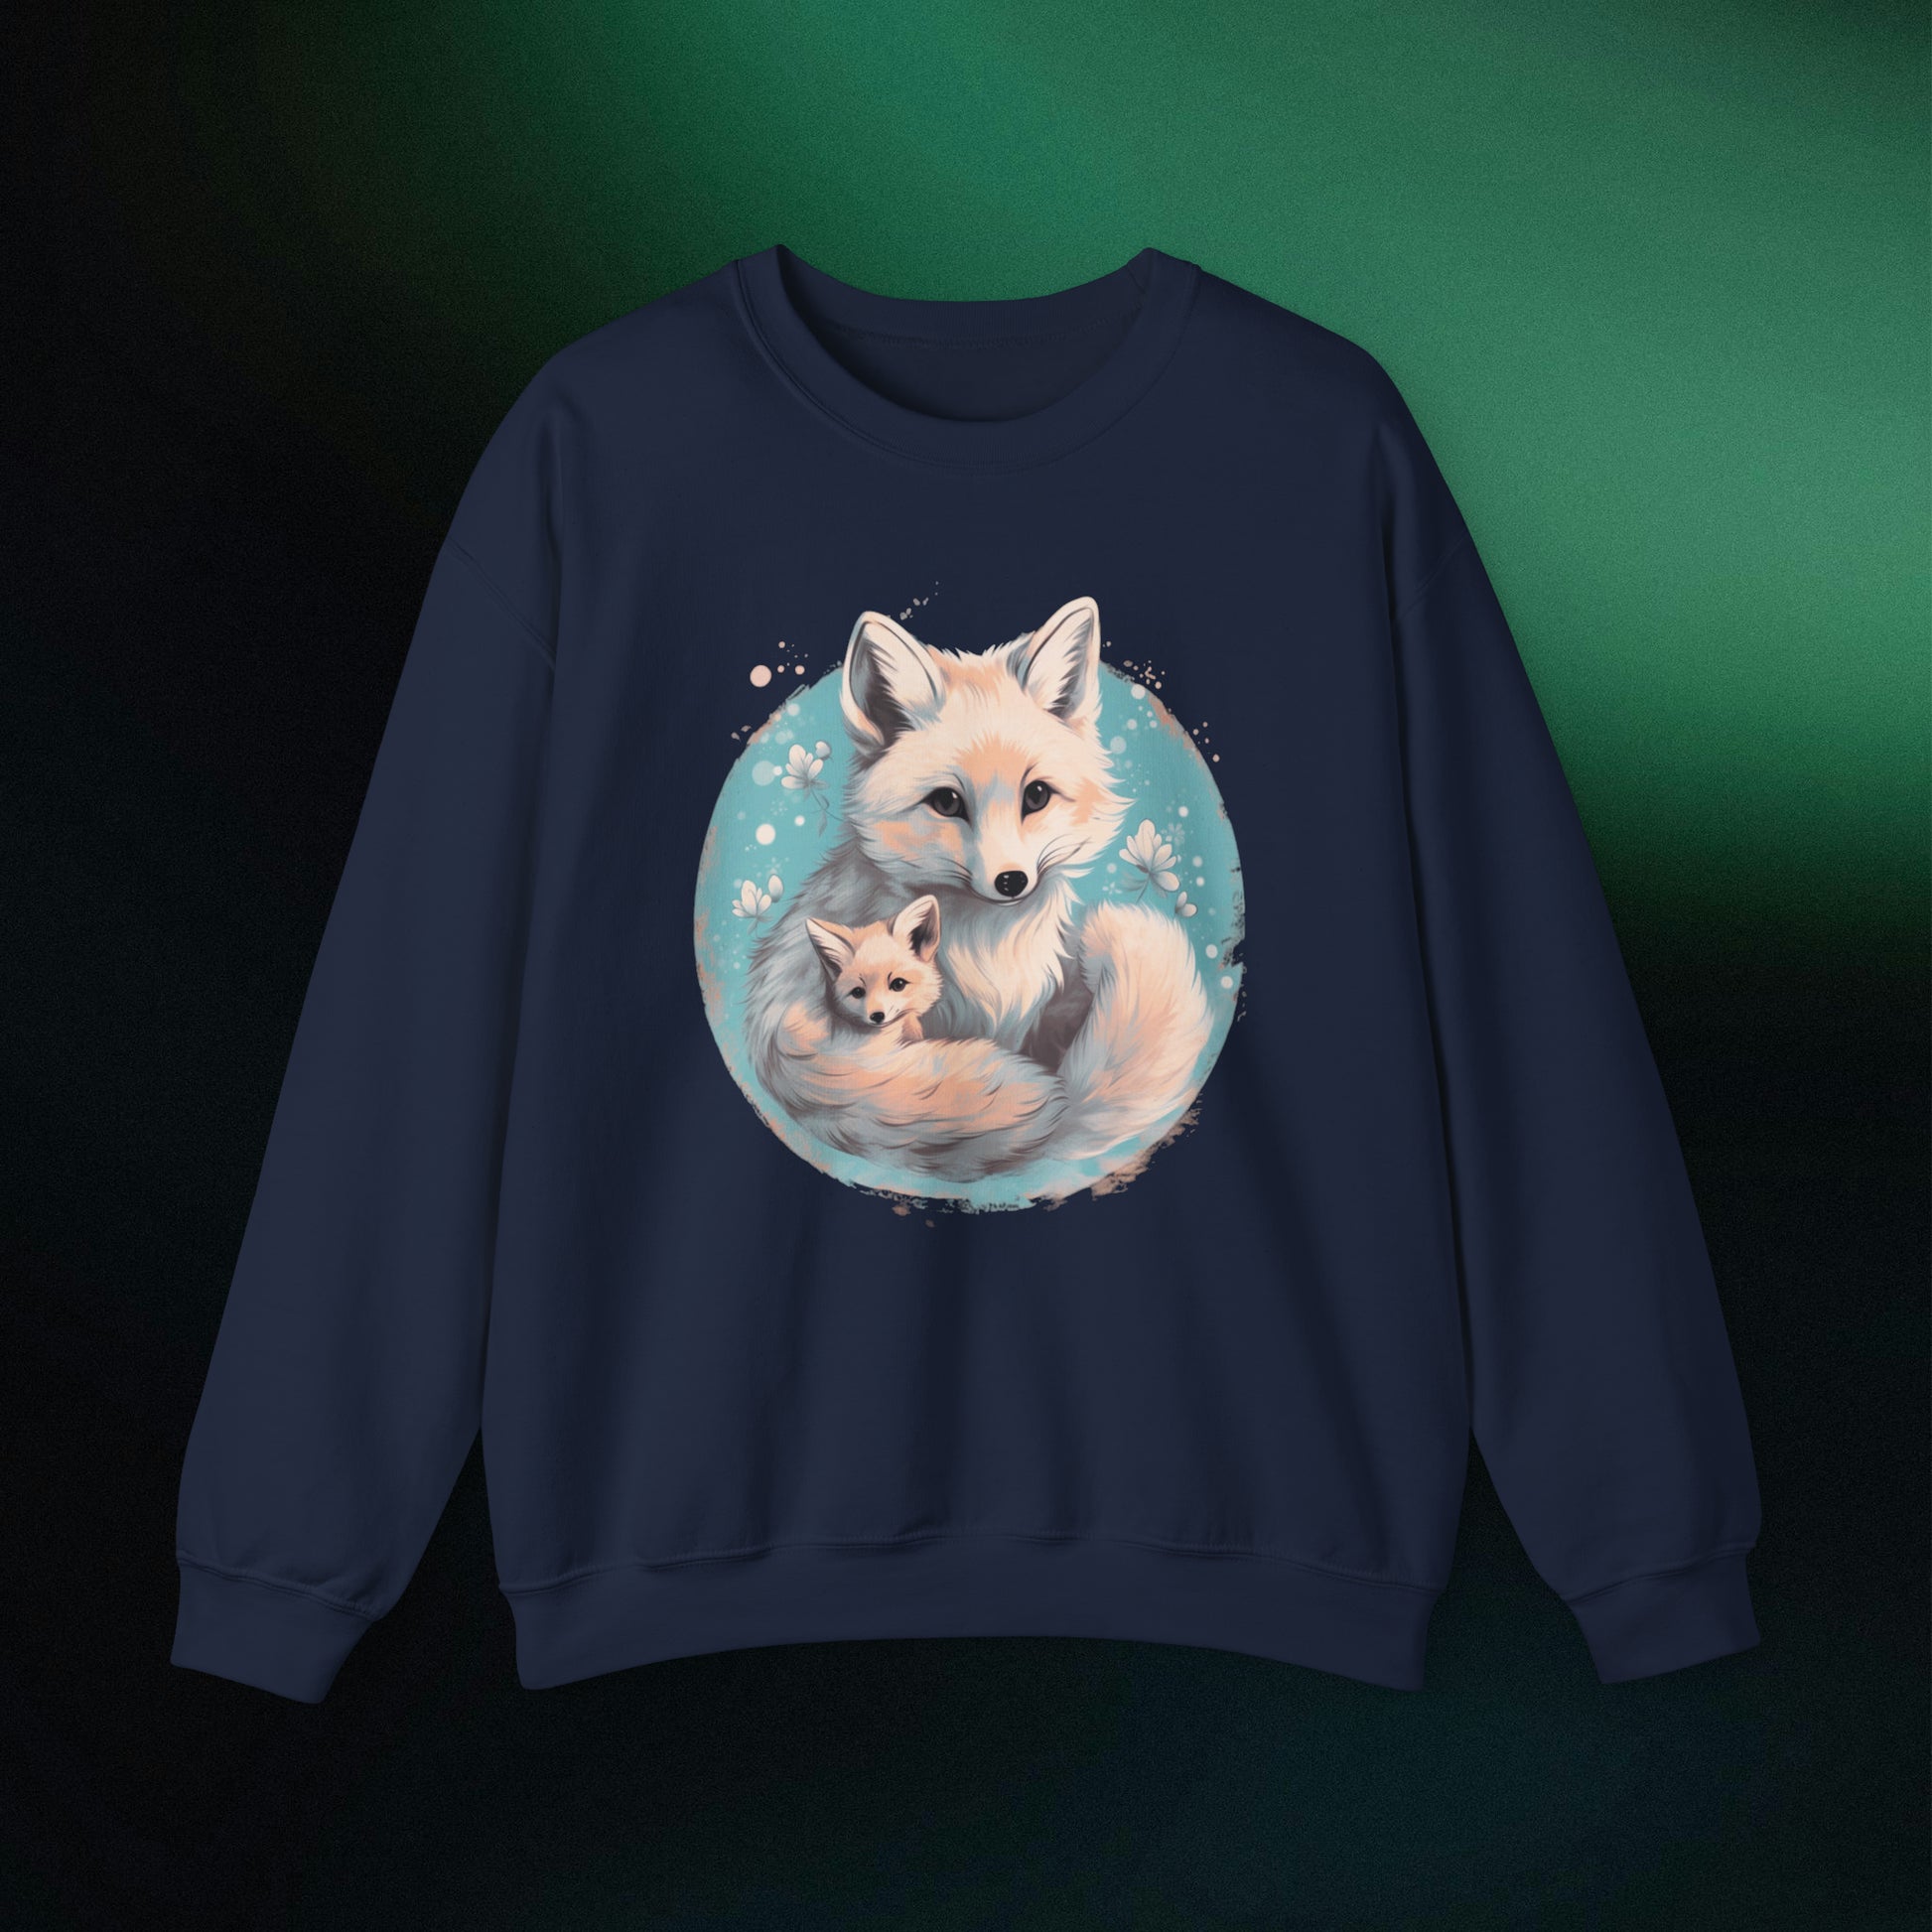 Vintage Forest Witch Aesthetic Sweatshirt - Cozy Fox Cottagecore Sweater with Mommy and Baby Fox Design Sweatshirt S Navy 